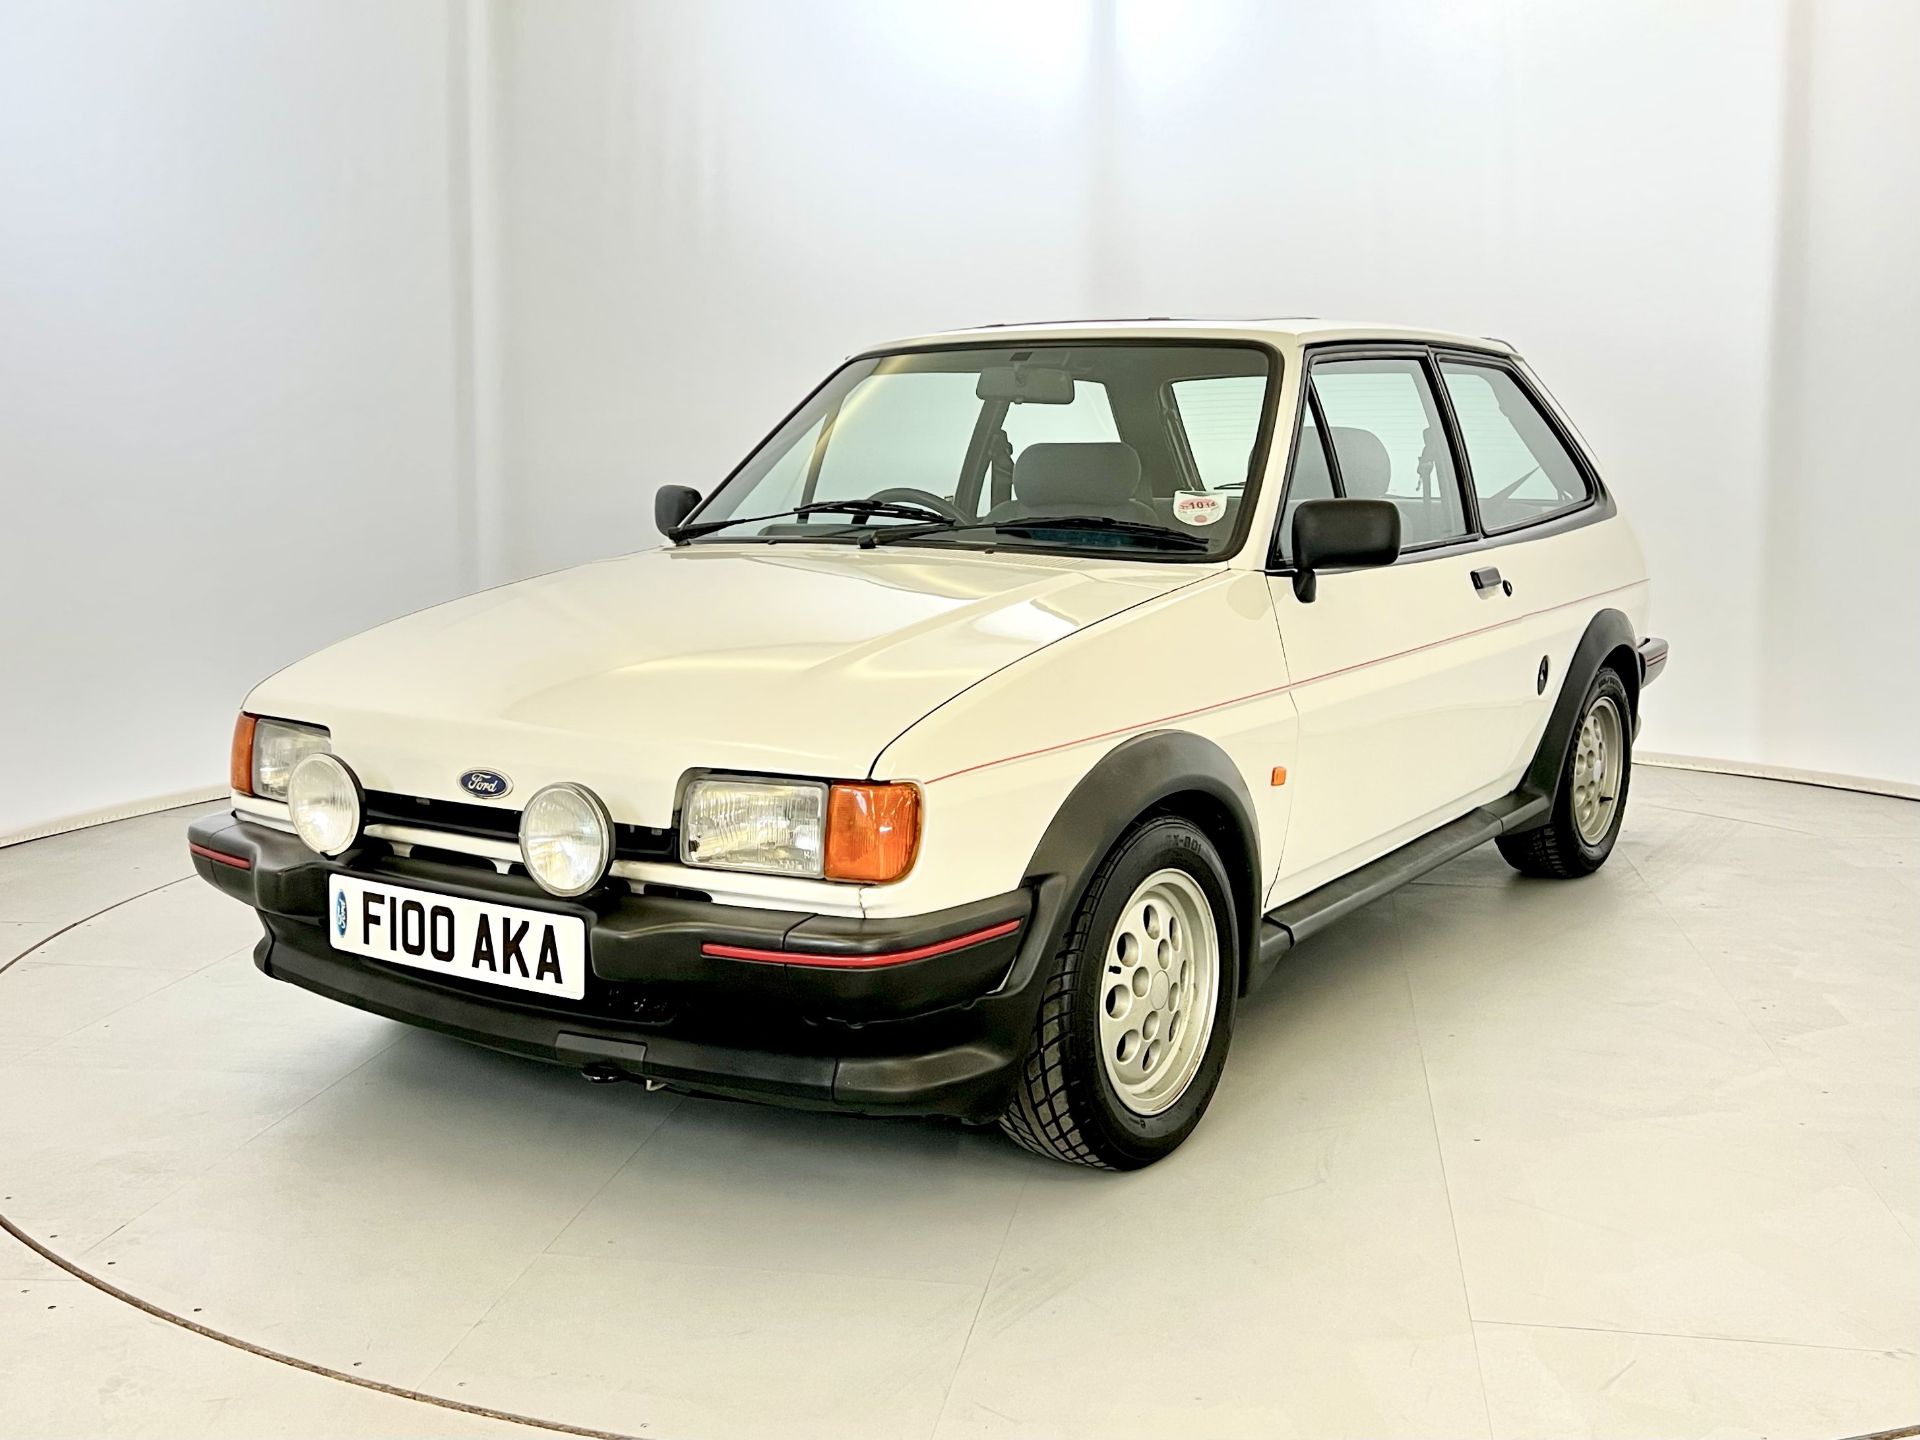 Ford Fiesta XR2 - Image 3 of 37